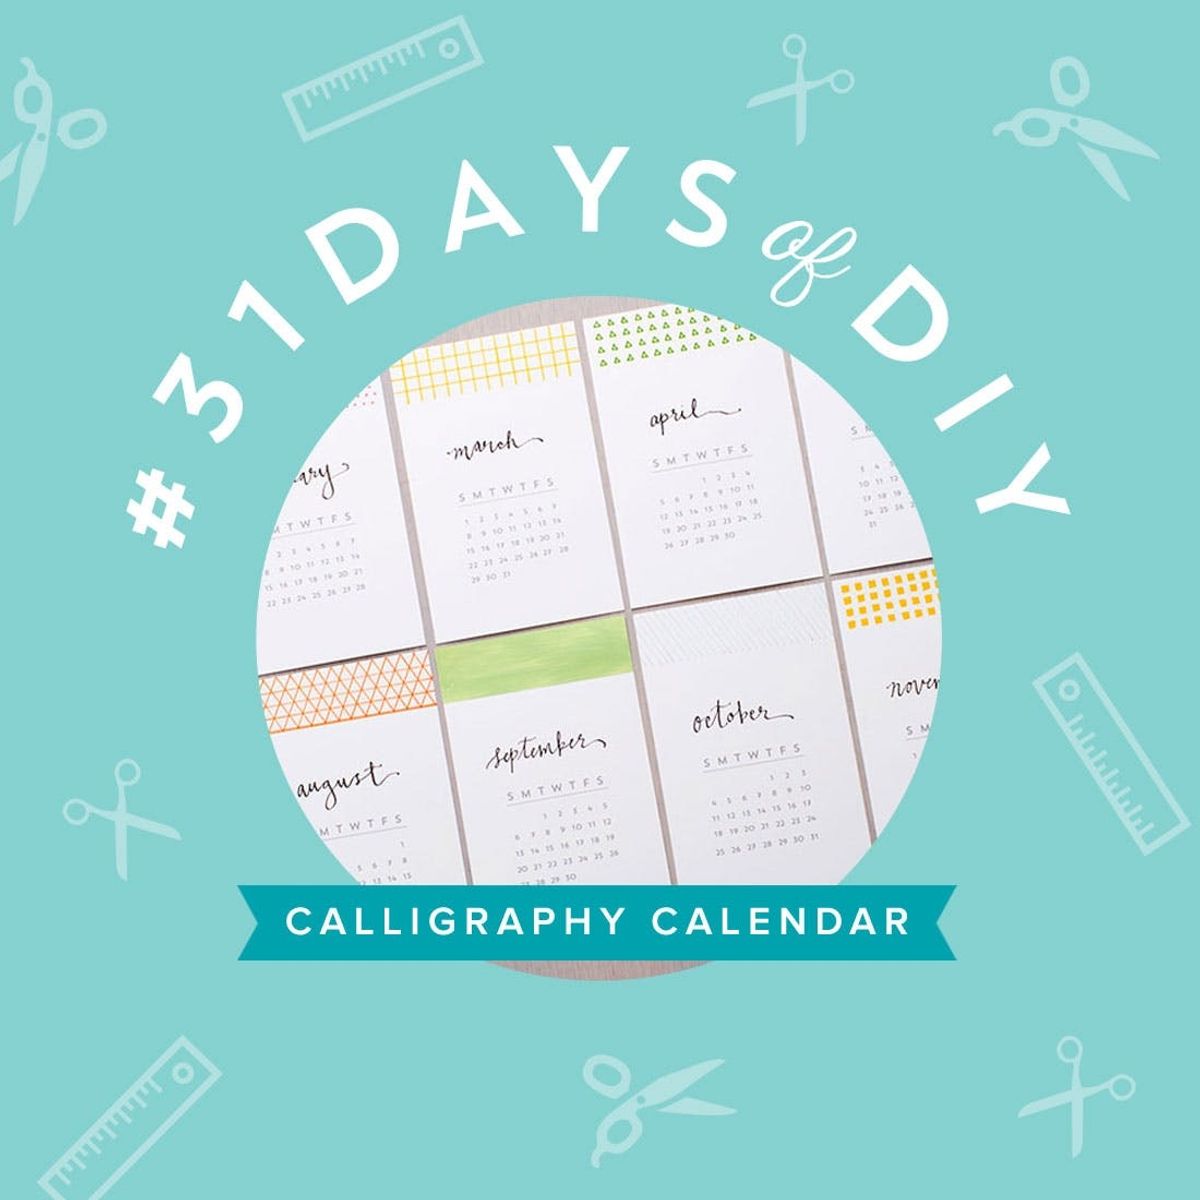 It’s Not Too Late to Make Our DIY Calligraphy Calendar (Free Printable!)